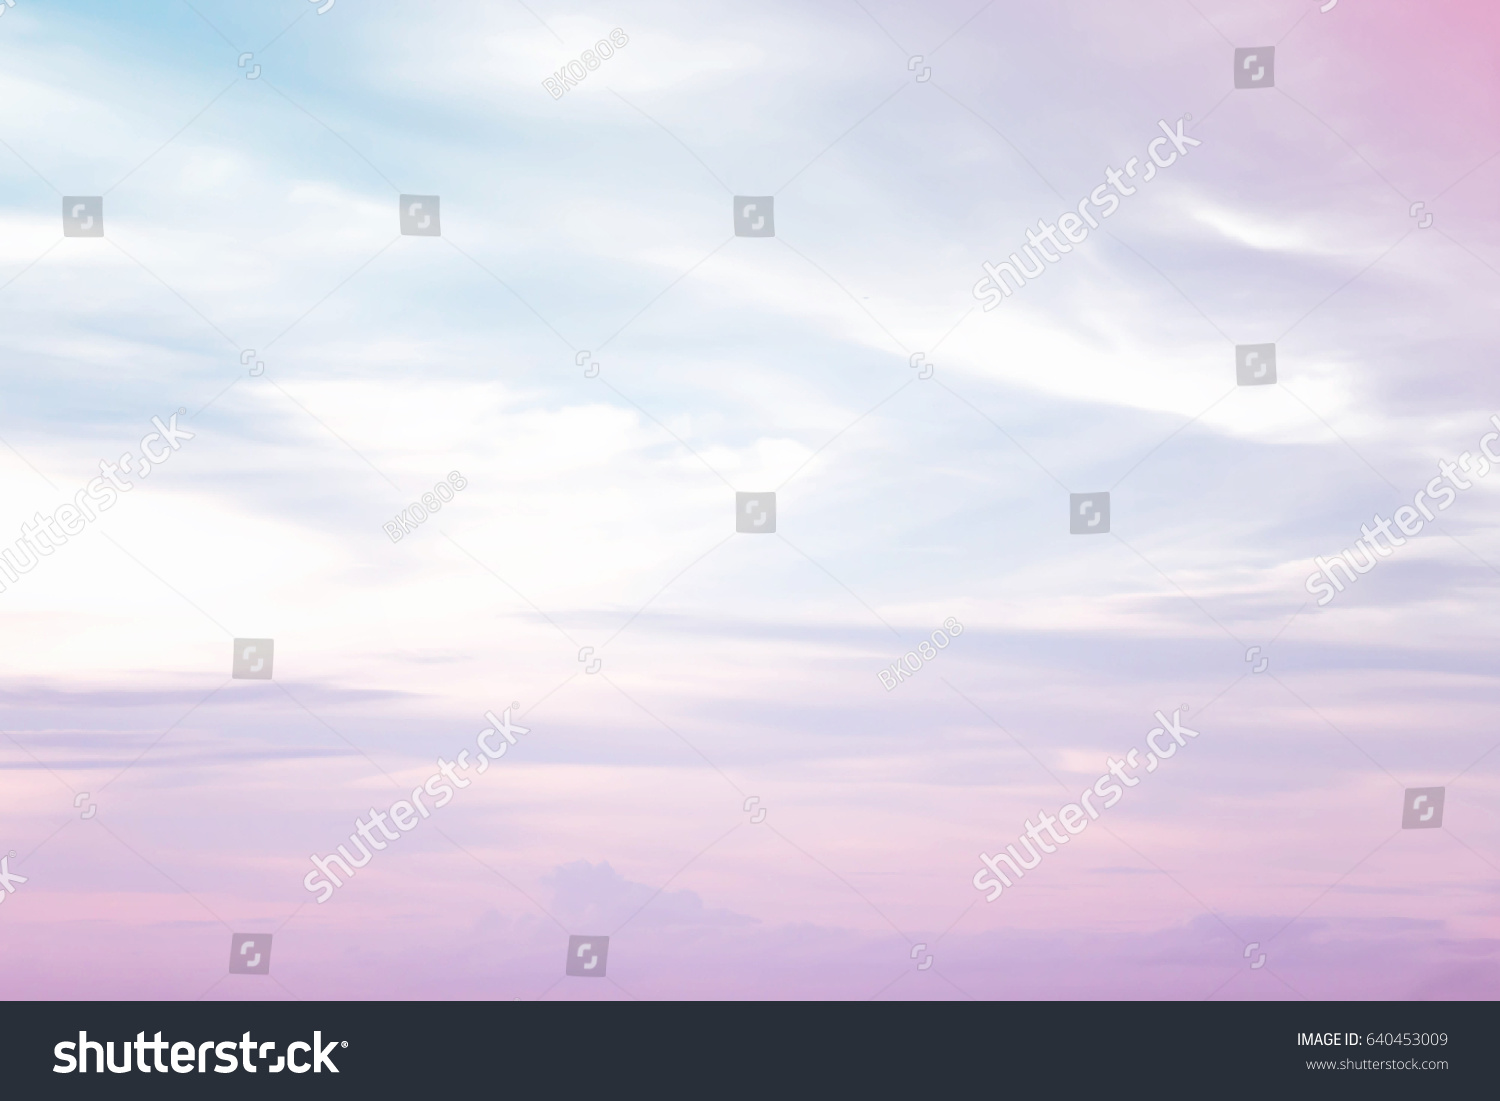 Soft Sky Cloud Background Pastel Colorabstract Stock Photo 640453009 ...